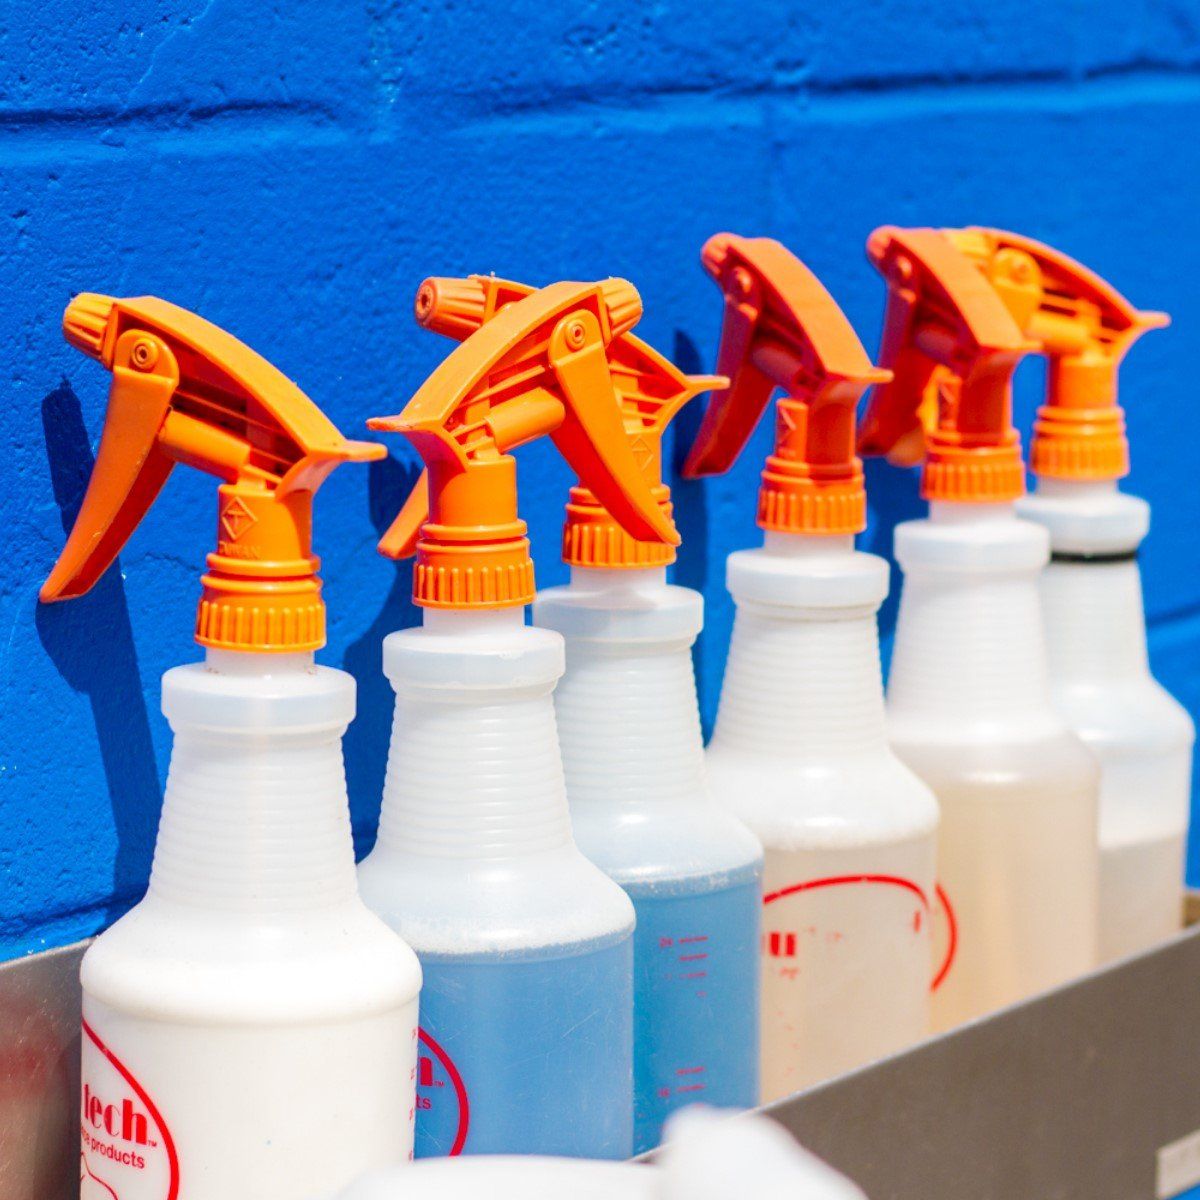 Car Wash Detailing - cleaning spray bottles lined up against blue wall